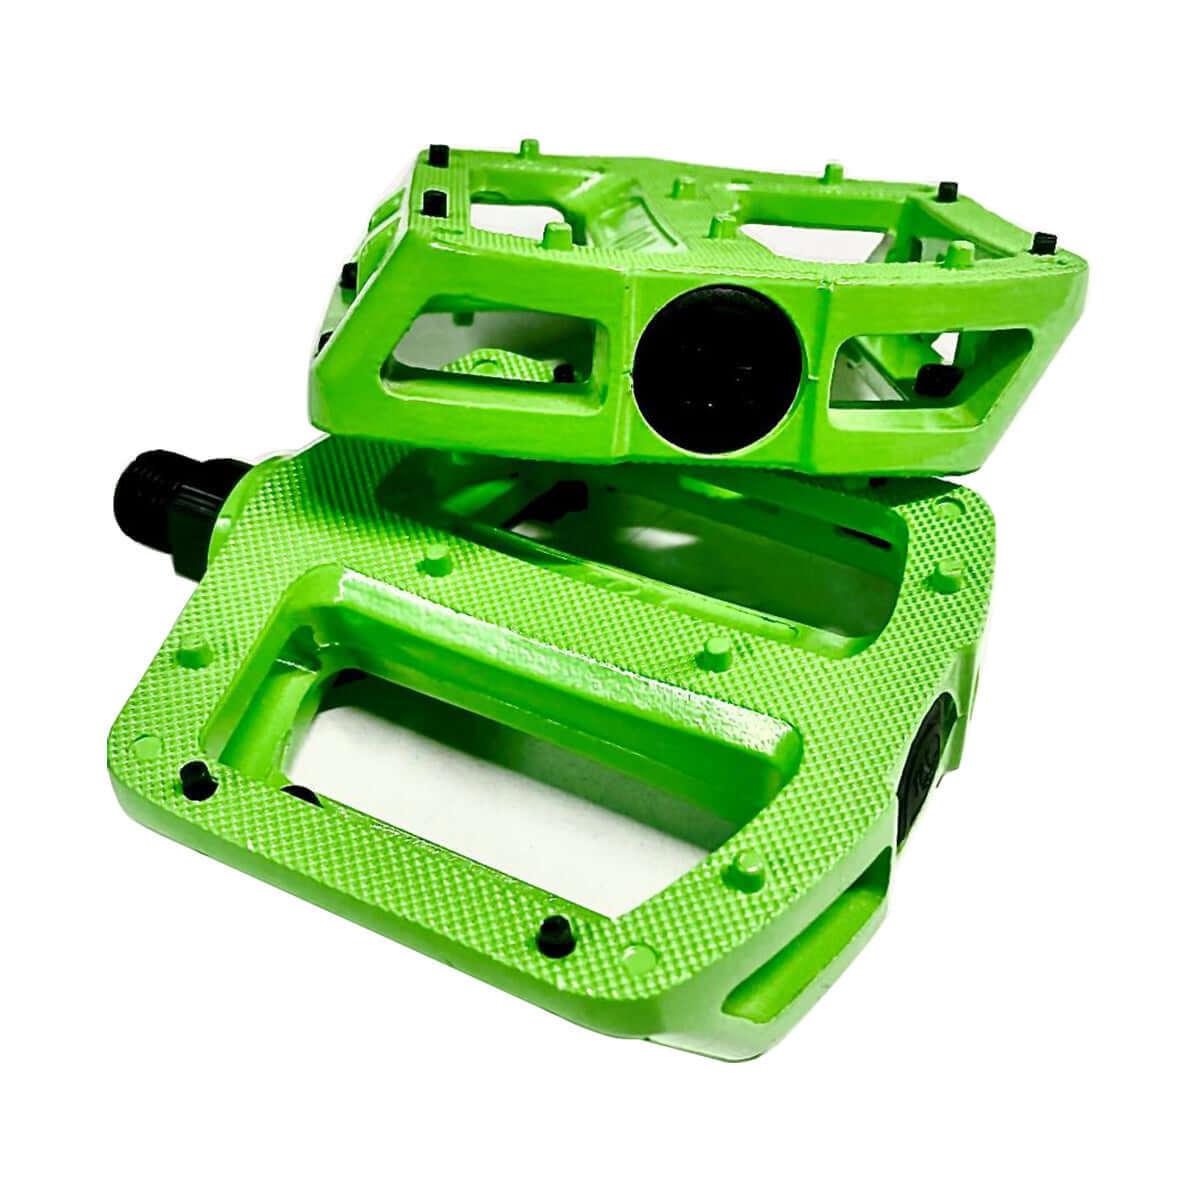 0 PEDAL LOOSE GREEN-Cast alloy platform with reinforcements to prevent breakage. Combination of molded and replaceable pins for dialing in just the right amount of traction.Specs:Lightweight, strong alloy bodiesCompact 0mm square platformsScrew in tapered steel traction pinsFewer traction pins to reduce weightHeat treated & oxide coated chromoly spindles (9/6” only)Precision ball bearingsRecessed dust shieldsWeight: 2.0 oz (595 g)-5050 Bike & Skate